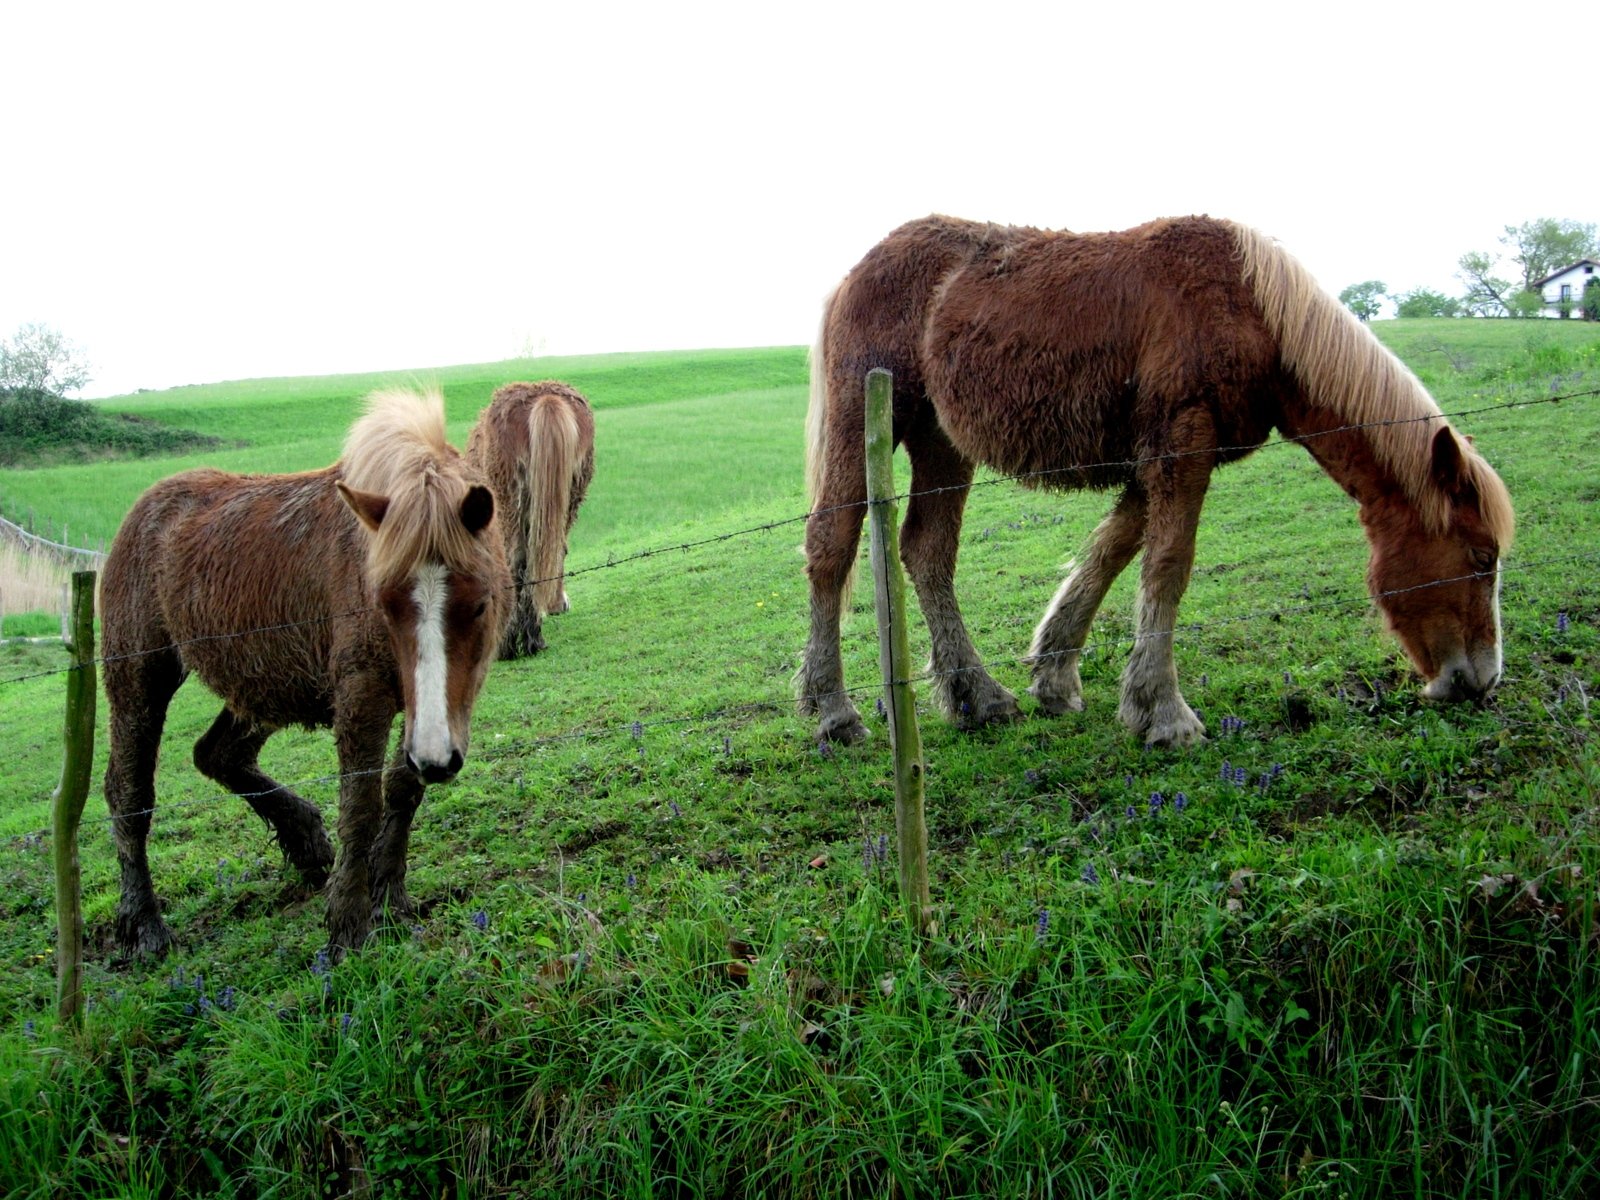 two horses grazing on grass in a fenced area